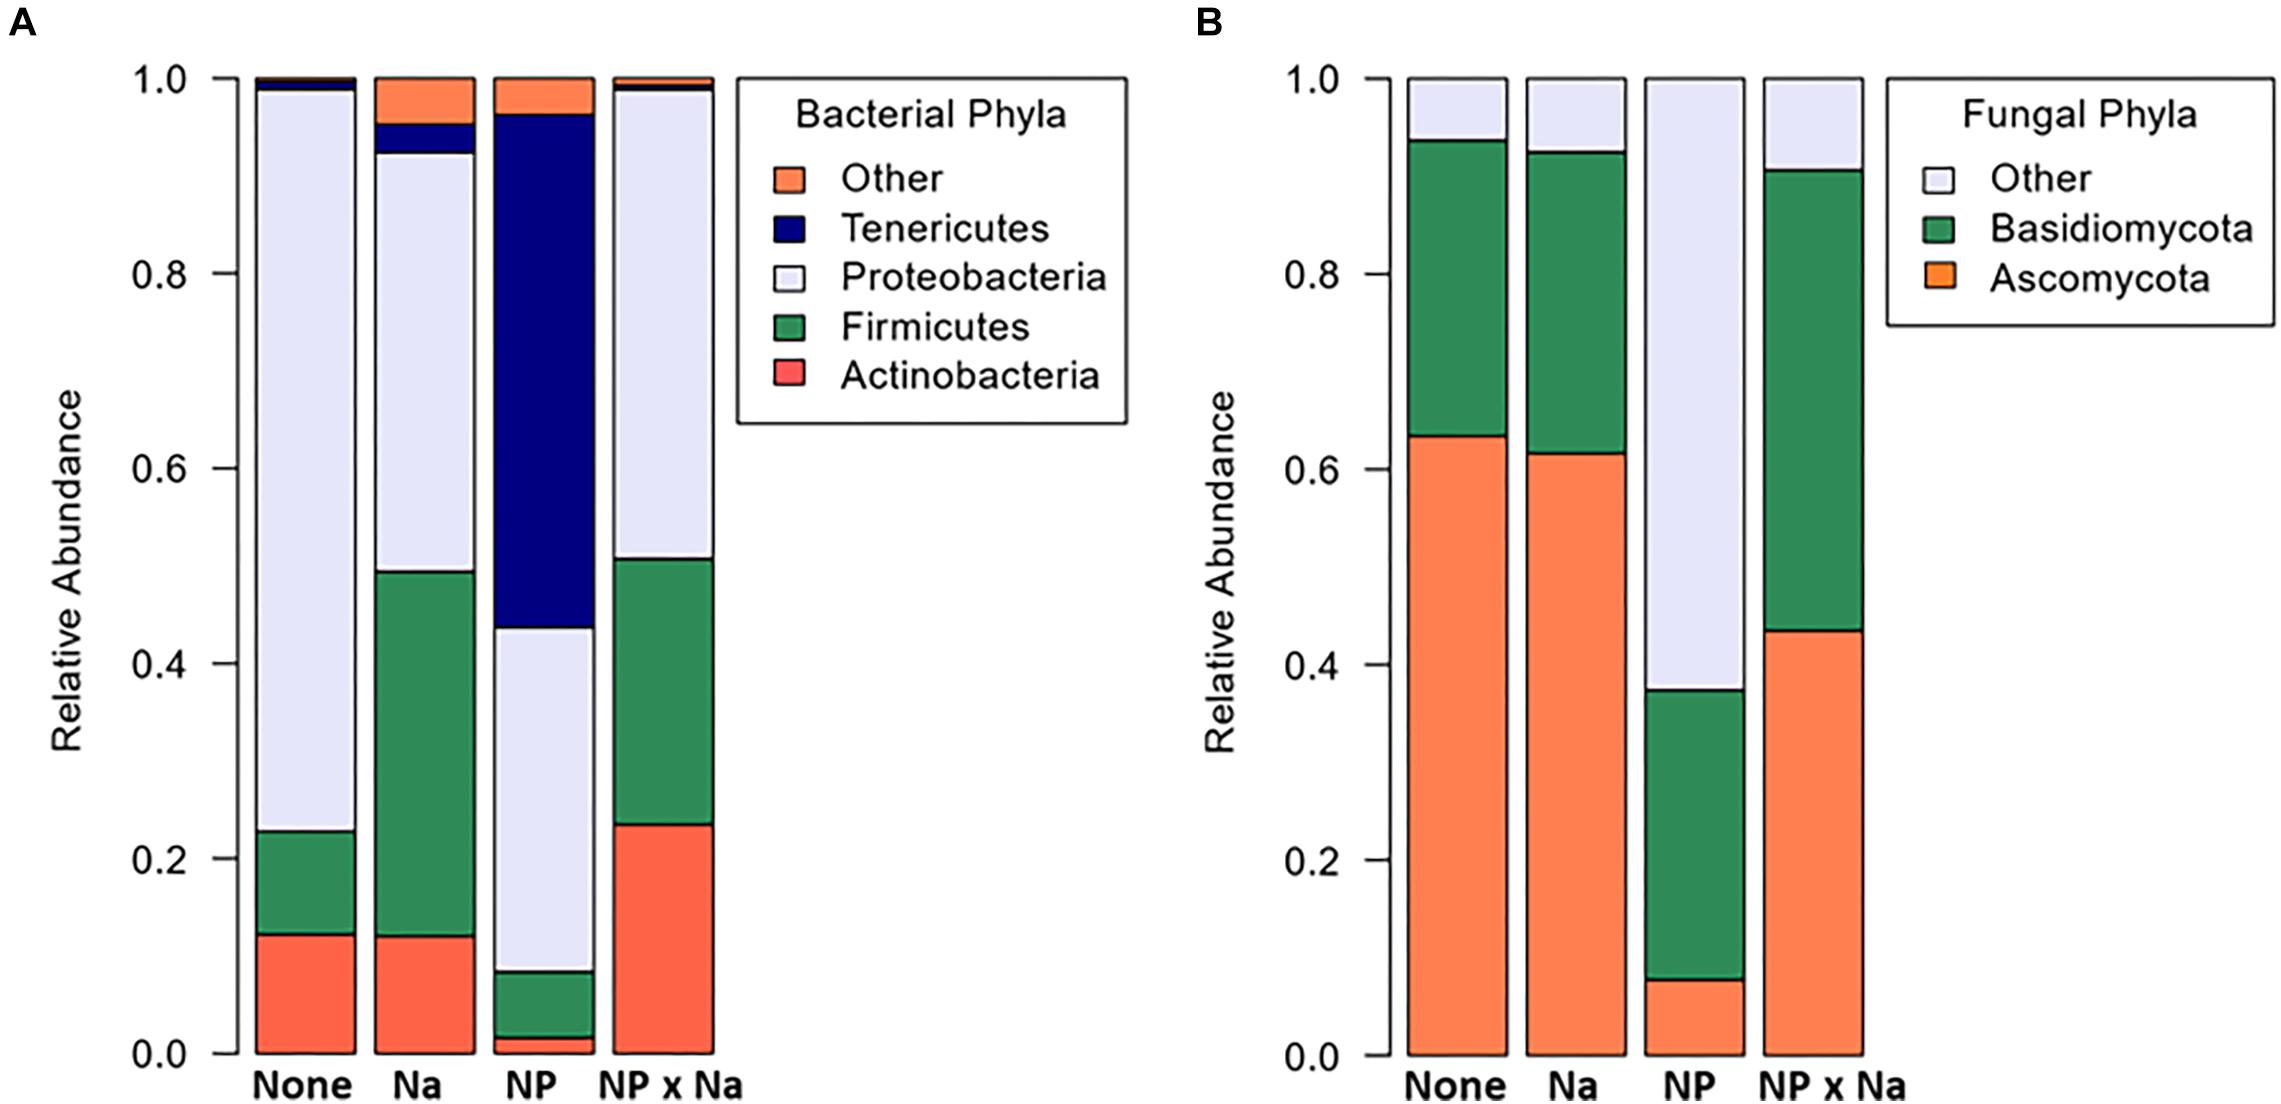 Frontiers Environmental Nutrients Alter Bacterial And Fungal Gut Microbiomes In The Common Meadow Katydid Orchelimum Vulgare Microbiology